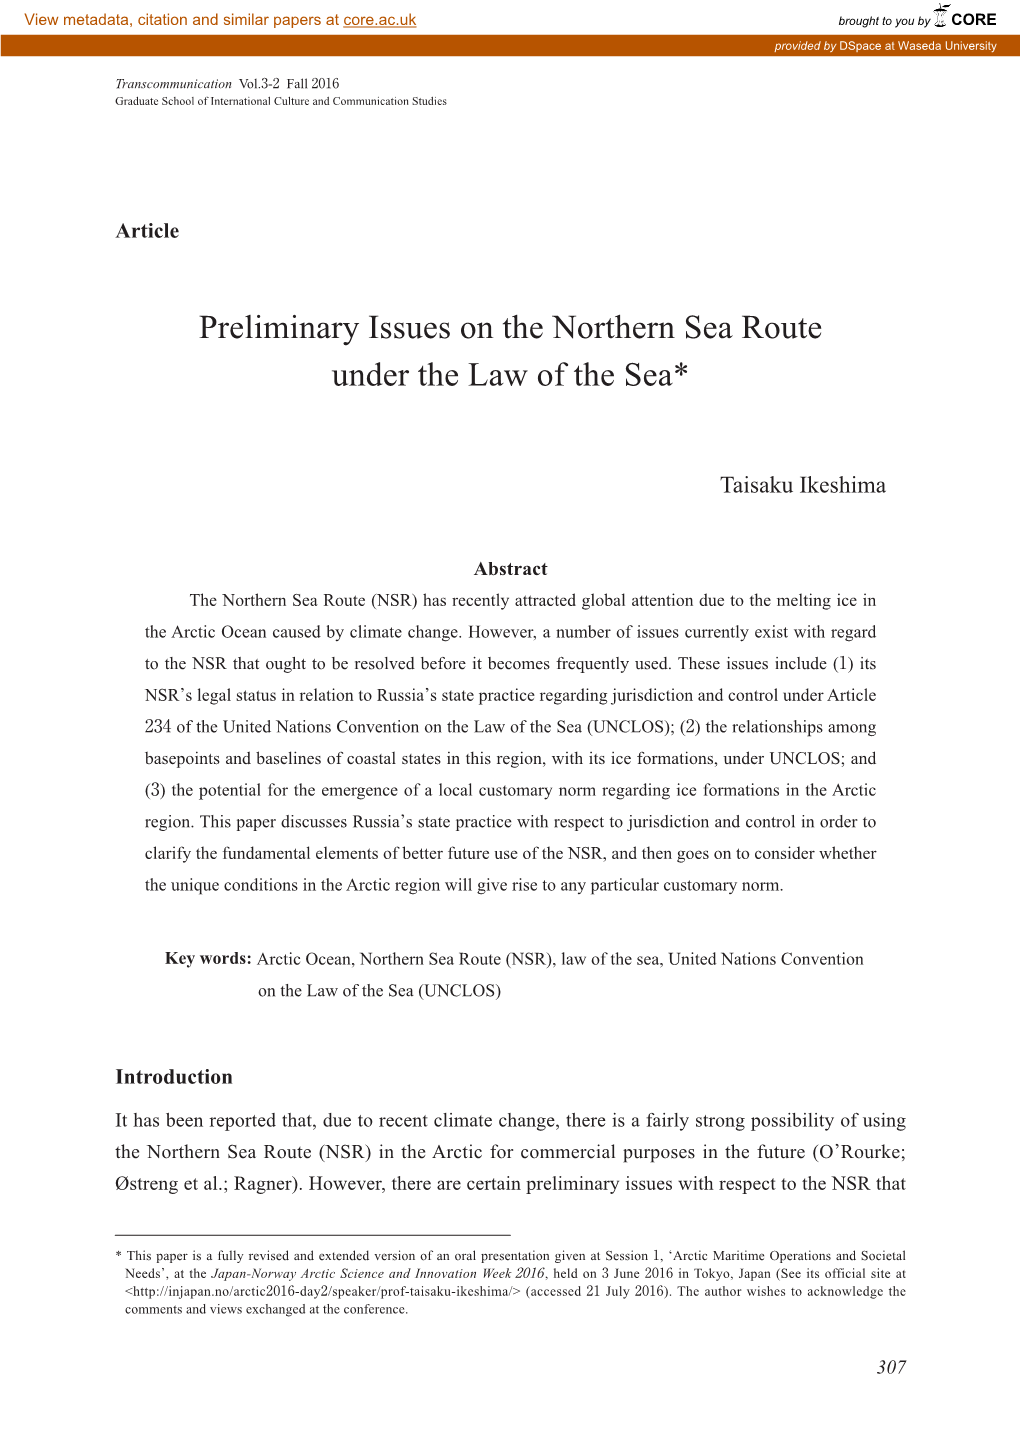 Preliminary Issues on the Northern Sea Route Under the Law of the Sea*